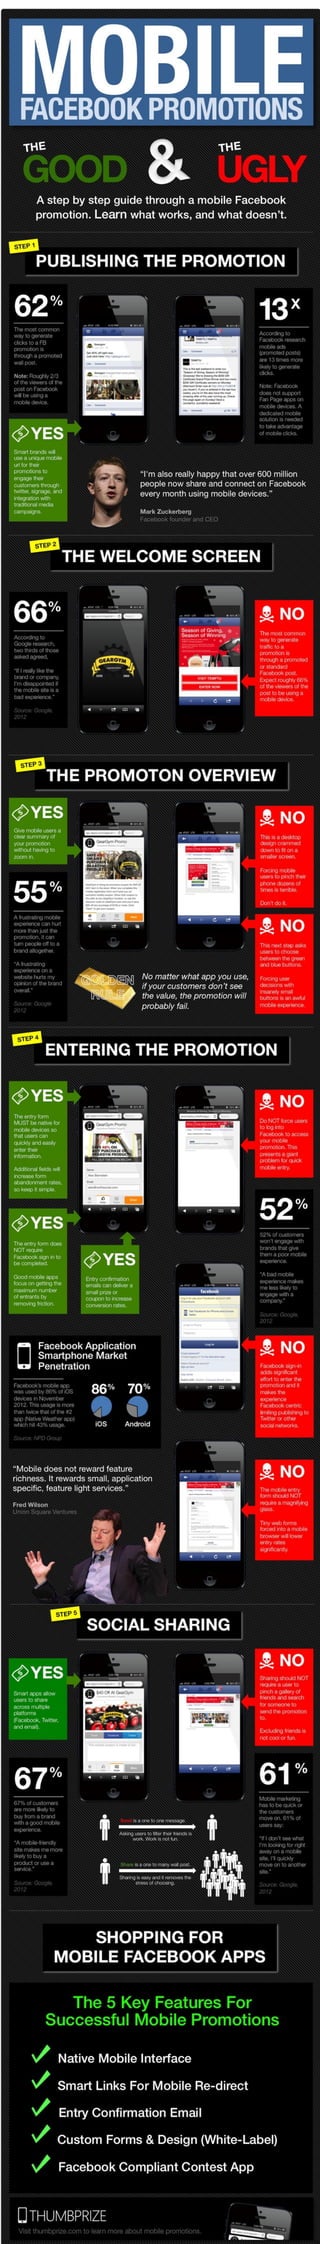 Guide to Mobile Facebook Promotions (Thumbprize)